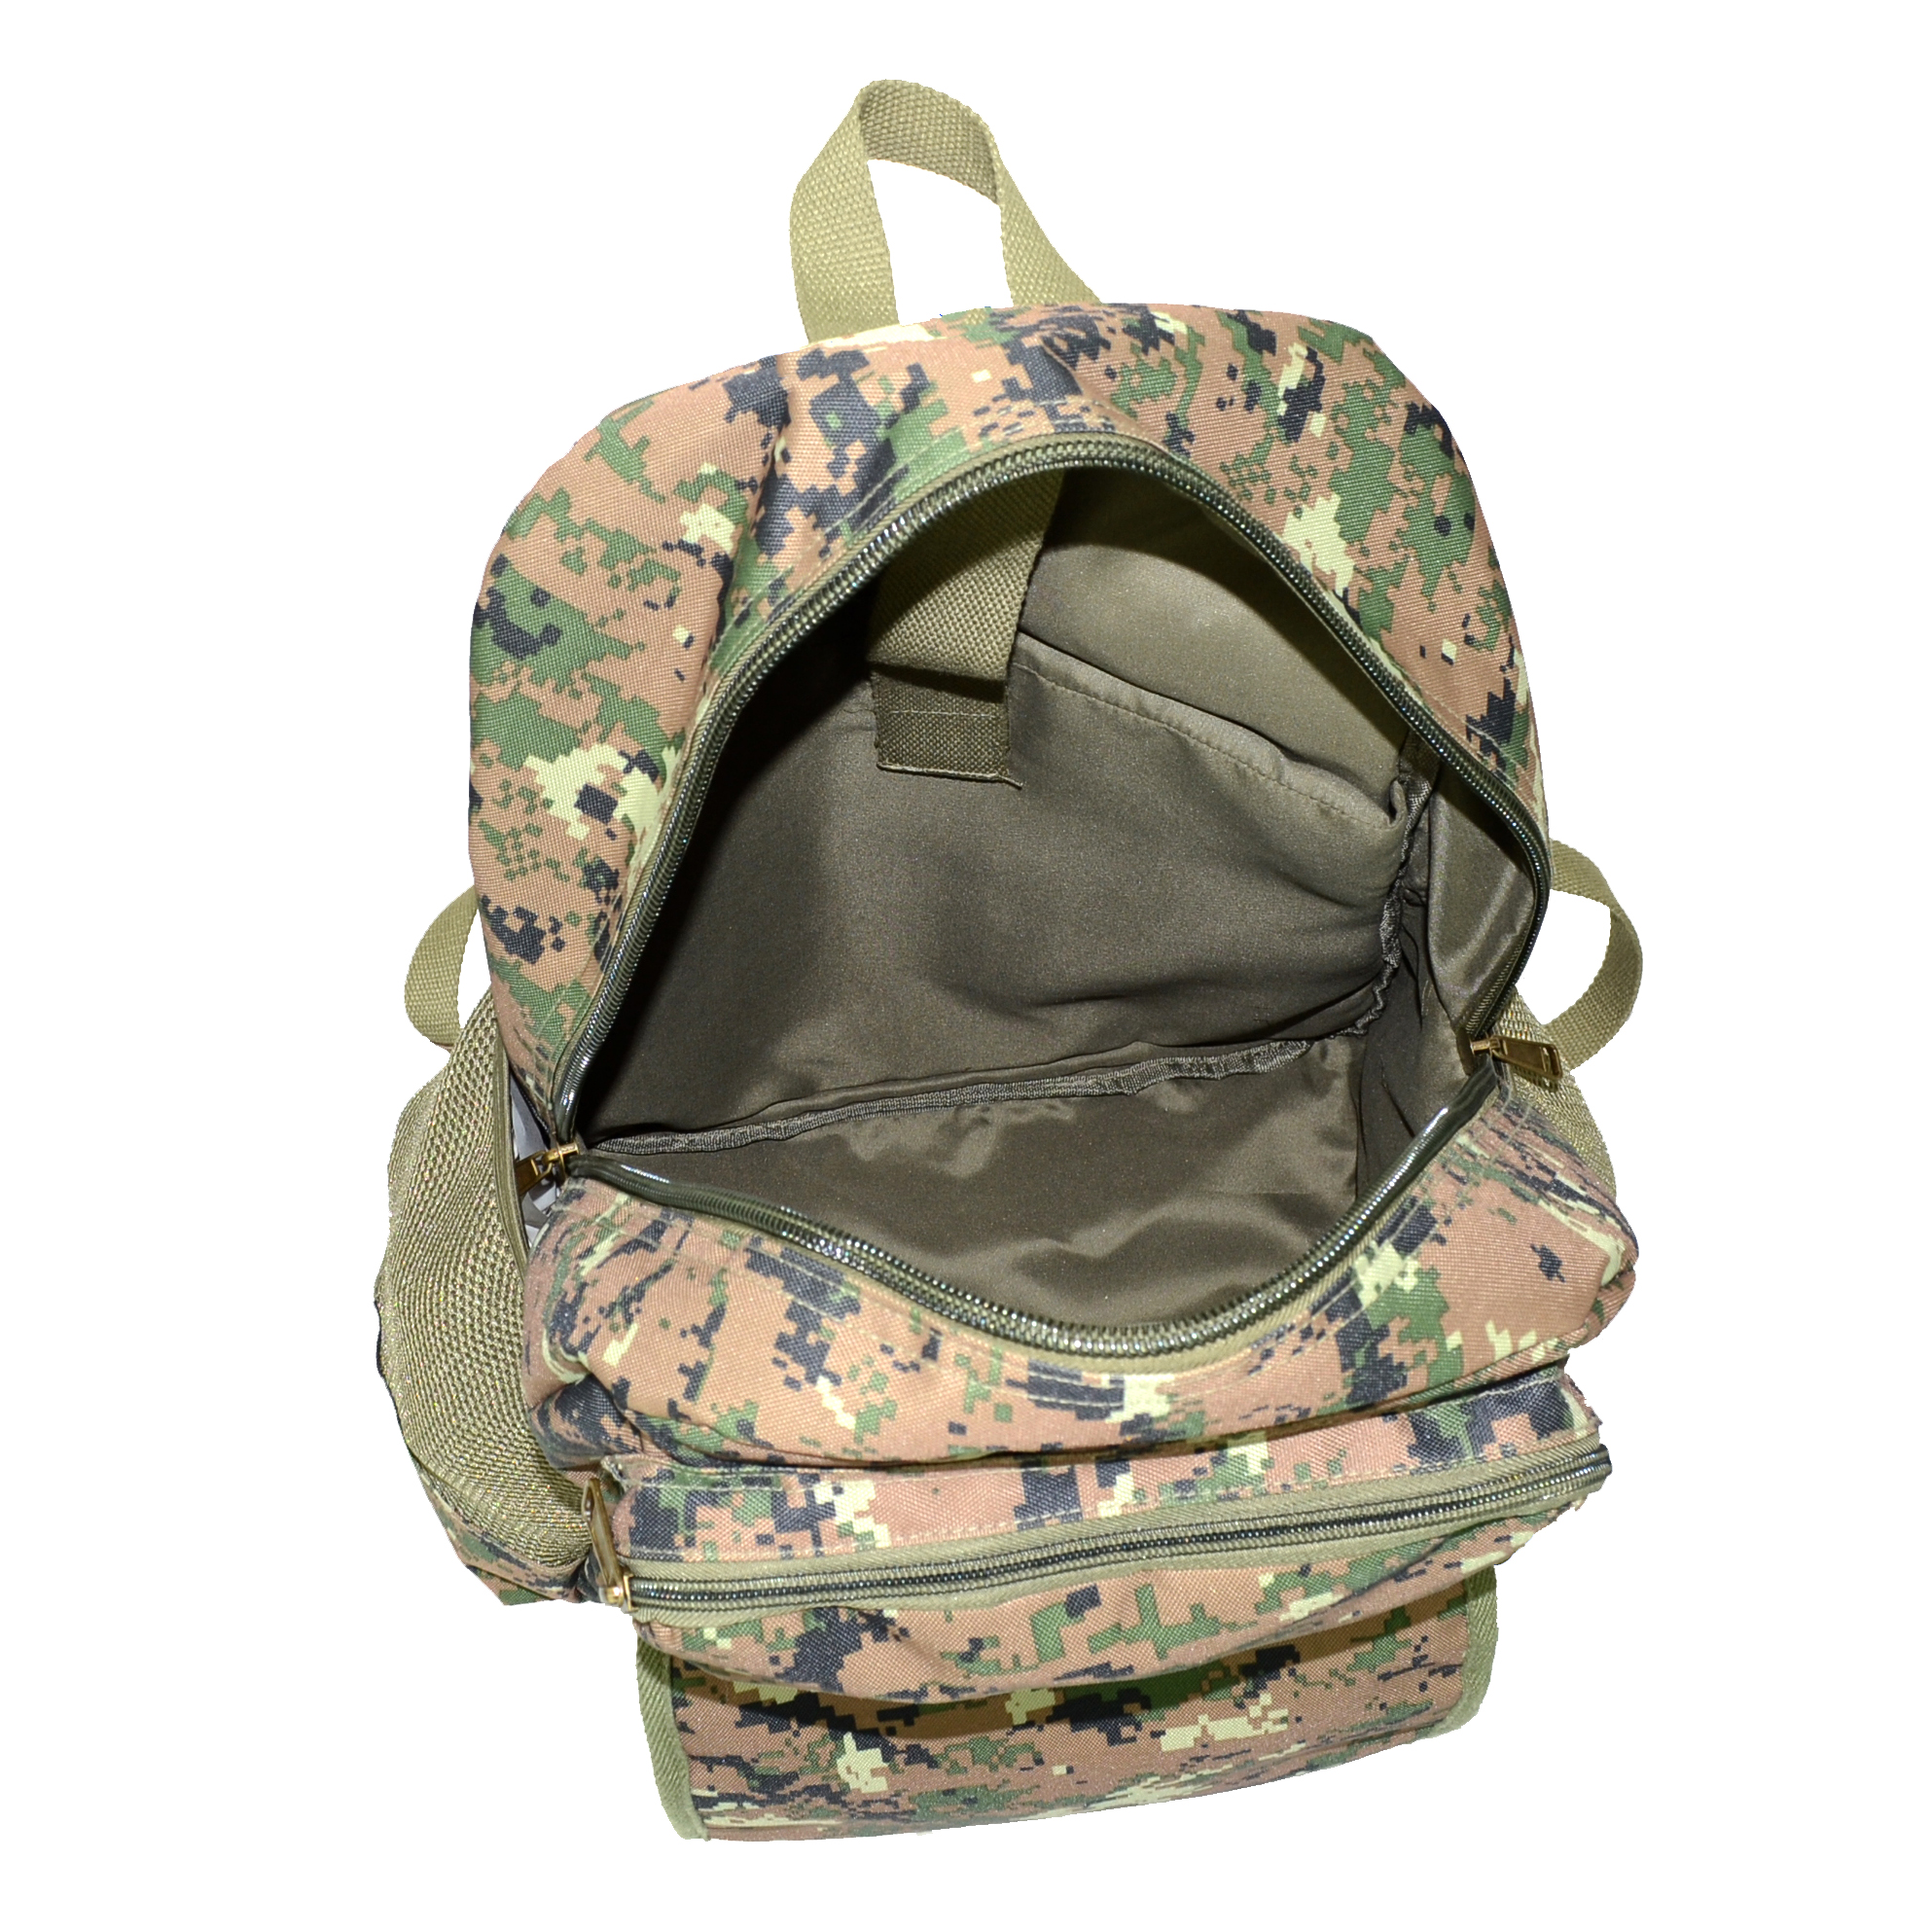 Montauk Leather Club Military Camouflage Woodland Print Water Resistant Backpack with 1Front Zipper Pocket and 1 Velcro Flap Zipper Pocket - image 3 of 4